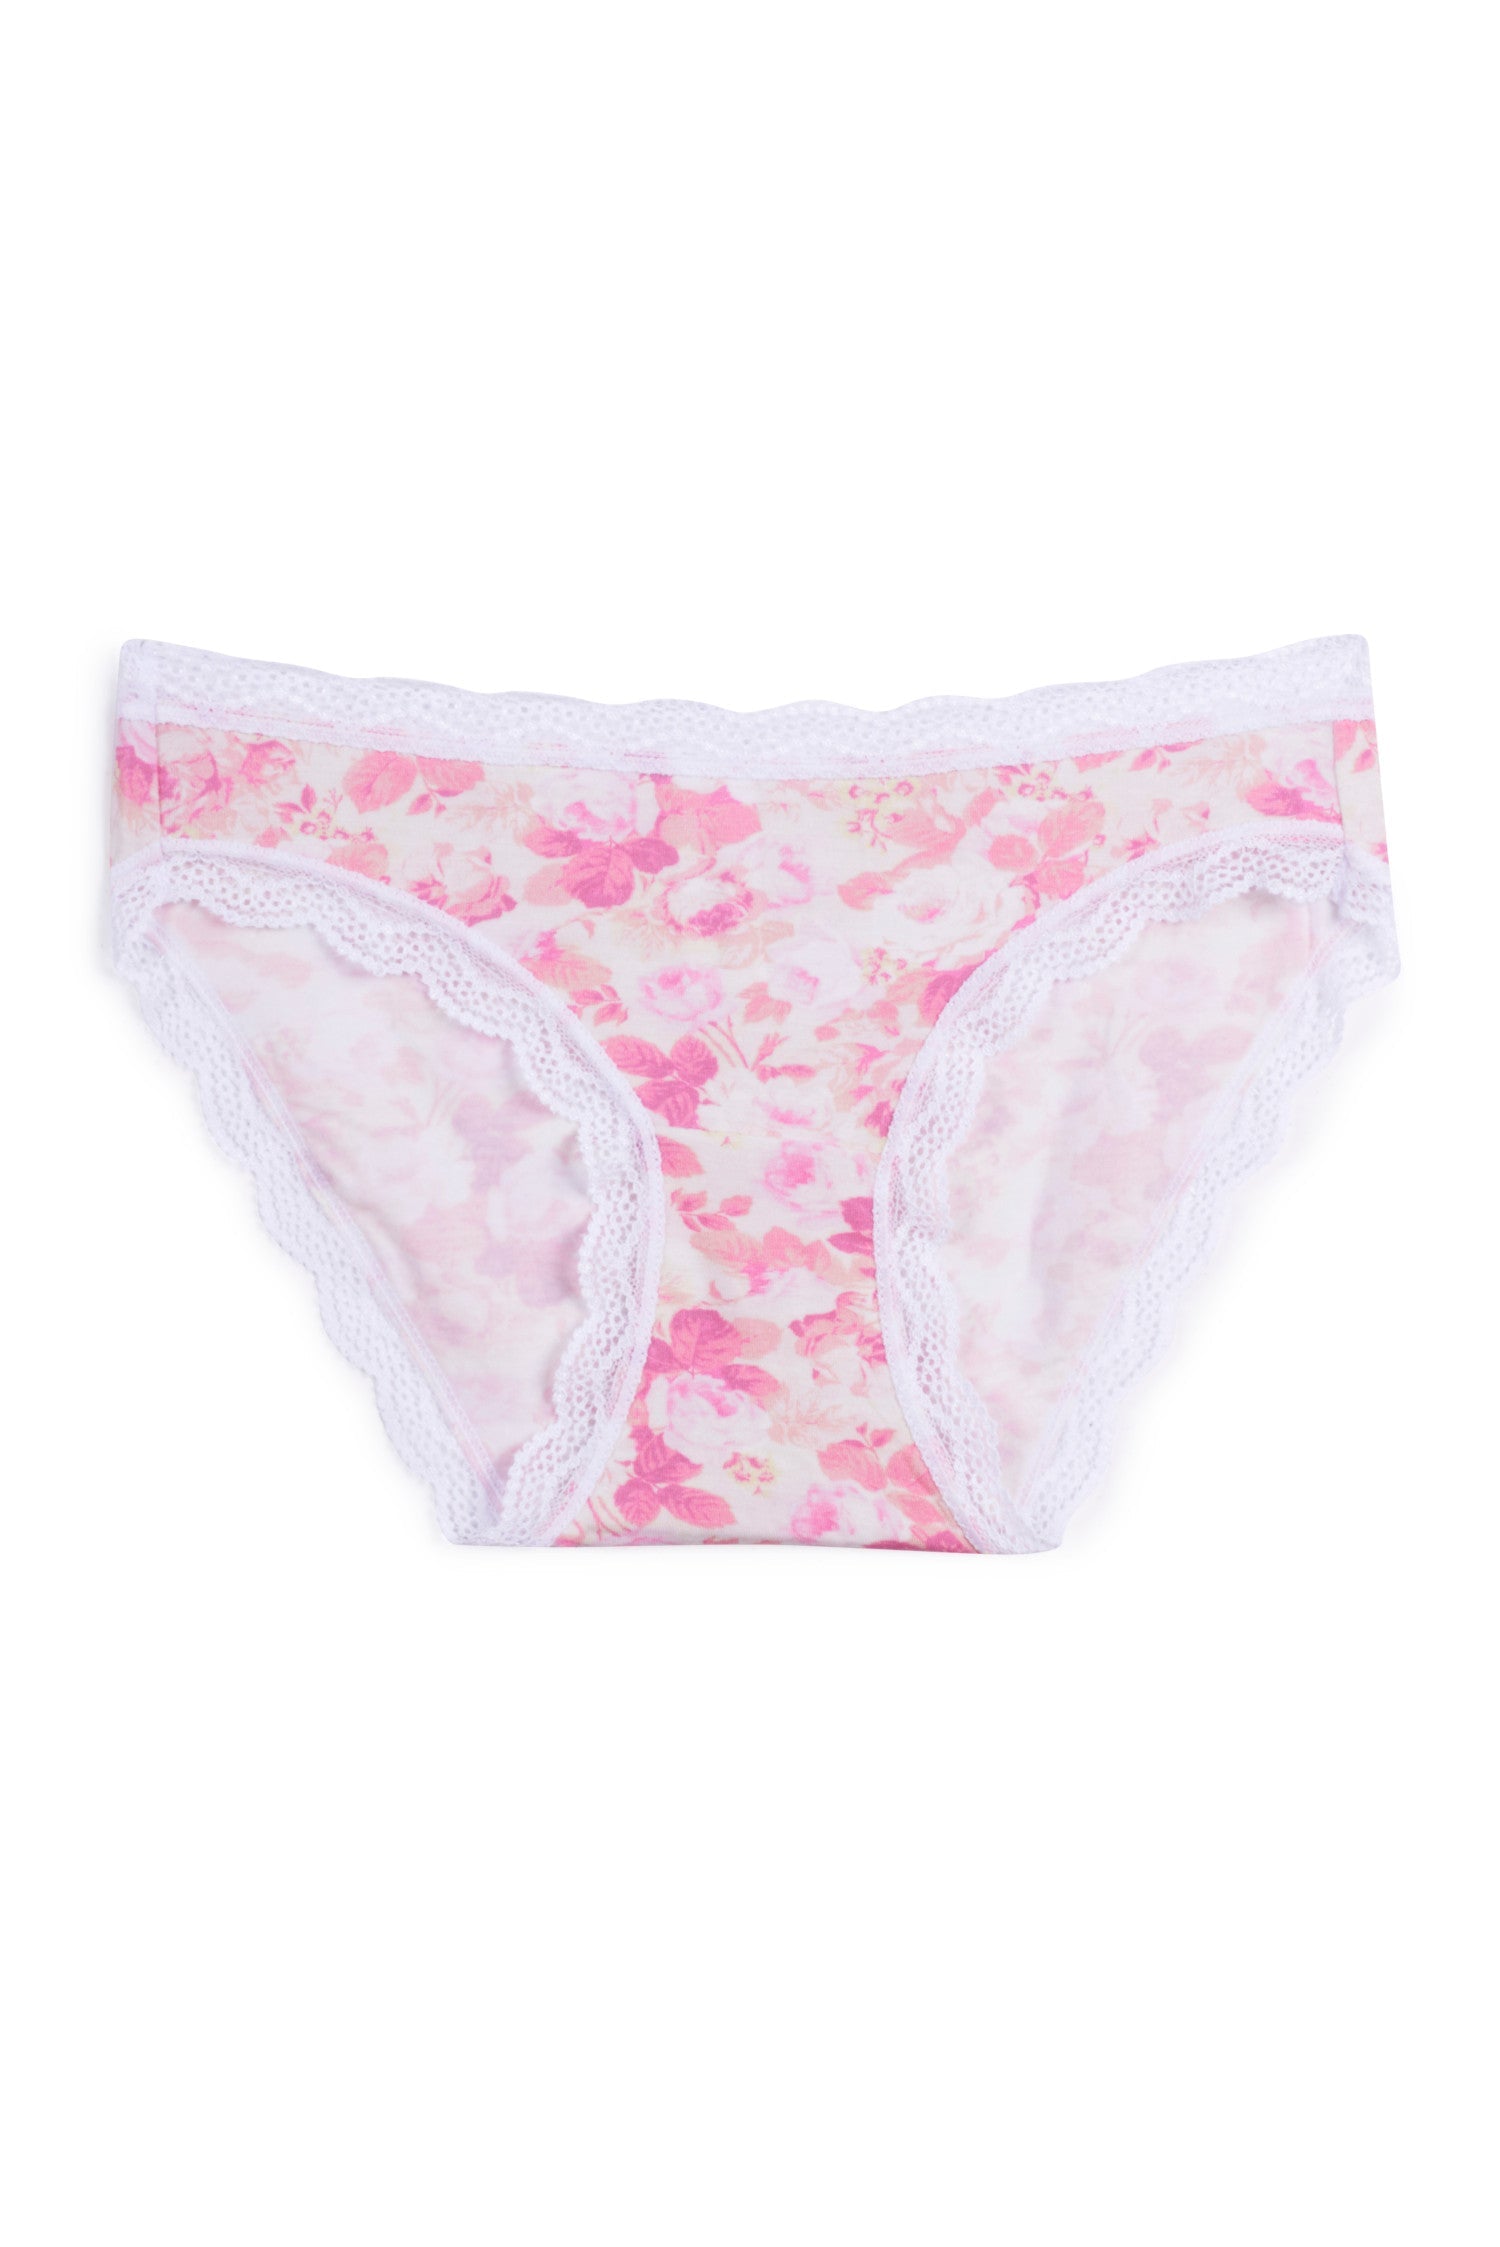 Womens sustainable multi floral lace knicker underwear box set